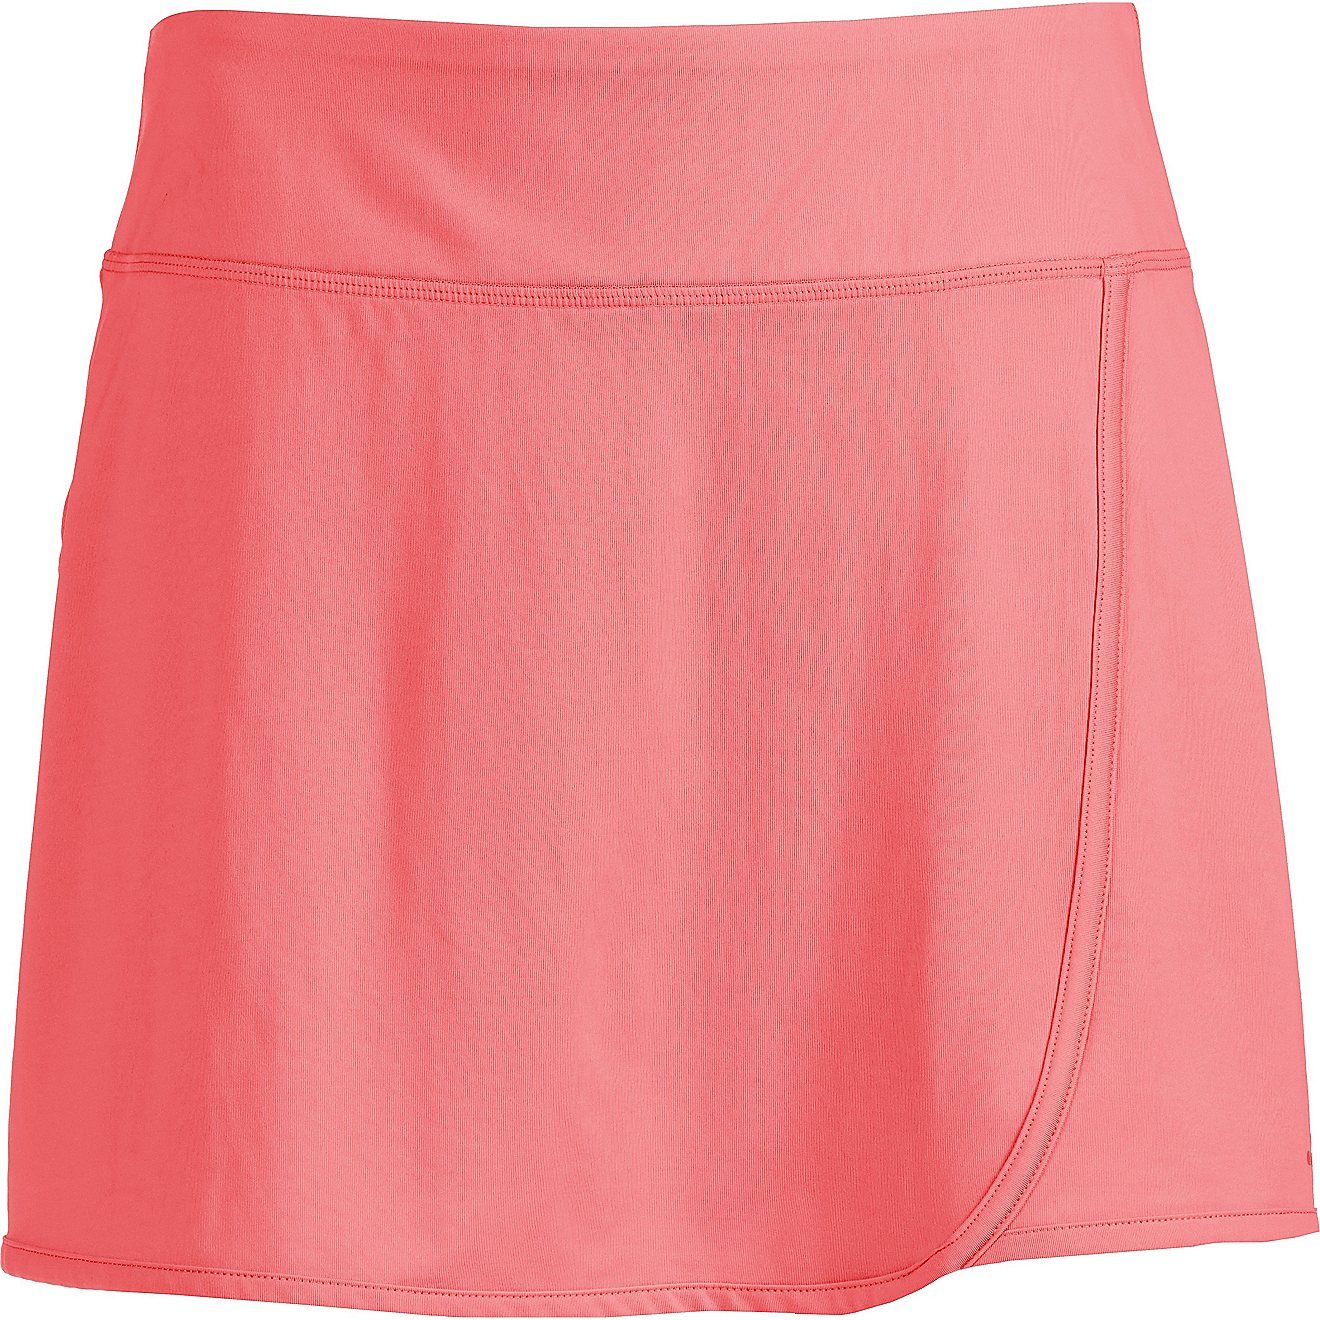 BCG Women's Taped Tennis Skort | Free Shipping at Academy | Academy Sports + Outdoors